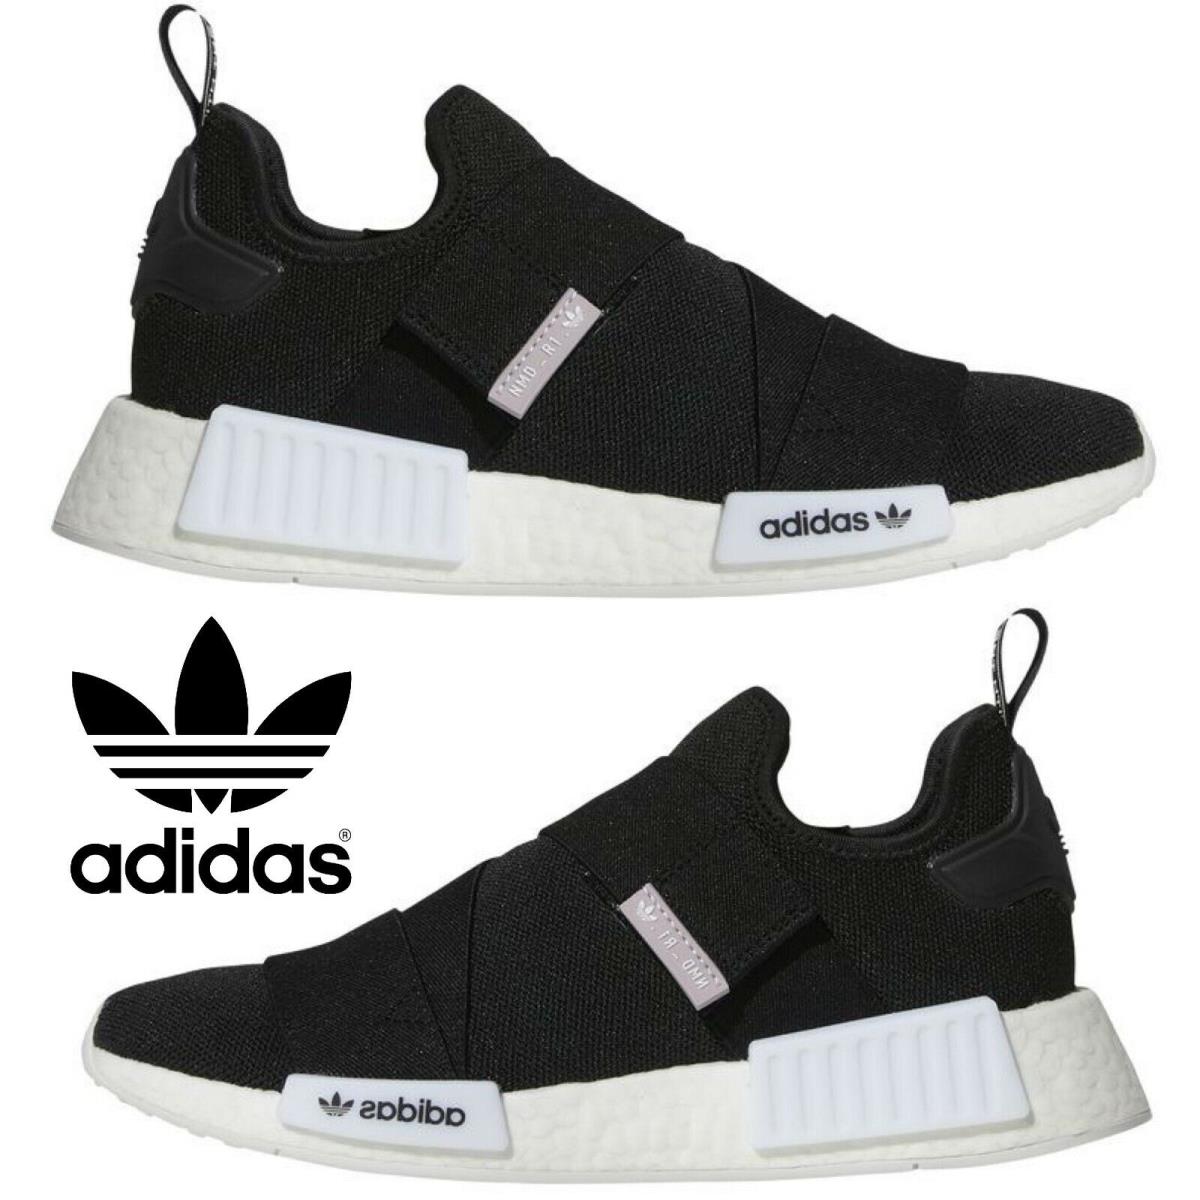 Adidas Originals Nmd R1 Laceless Women s Sneakers Casual Shoes Sport Running